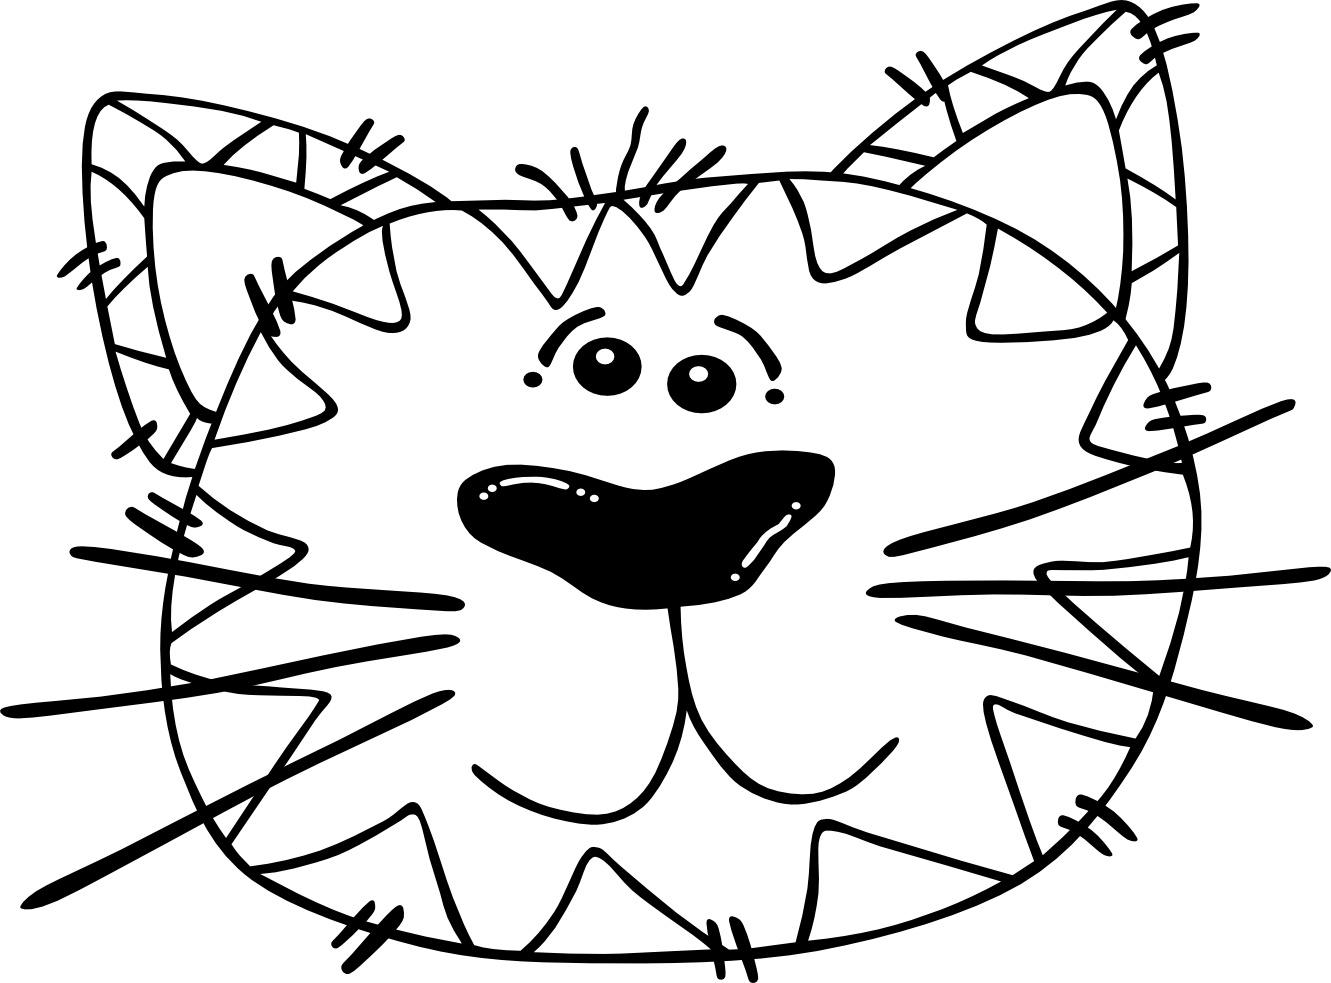 Coloring Pages Of Puppy Faces | GTM Ccamish